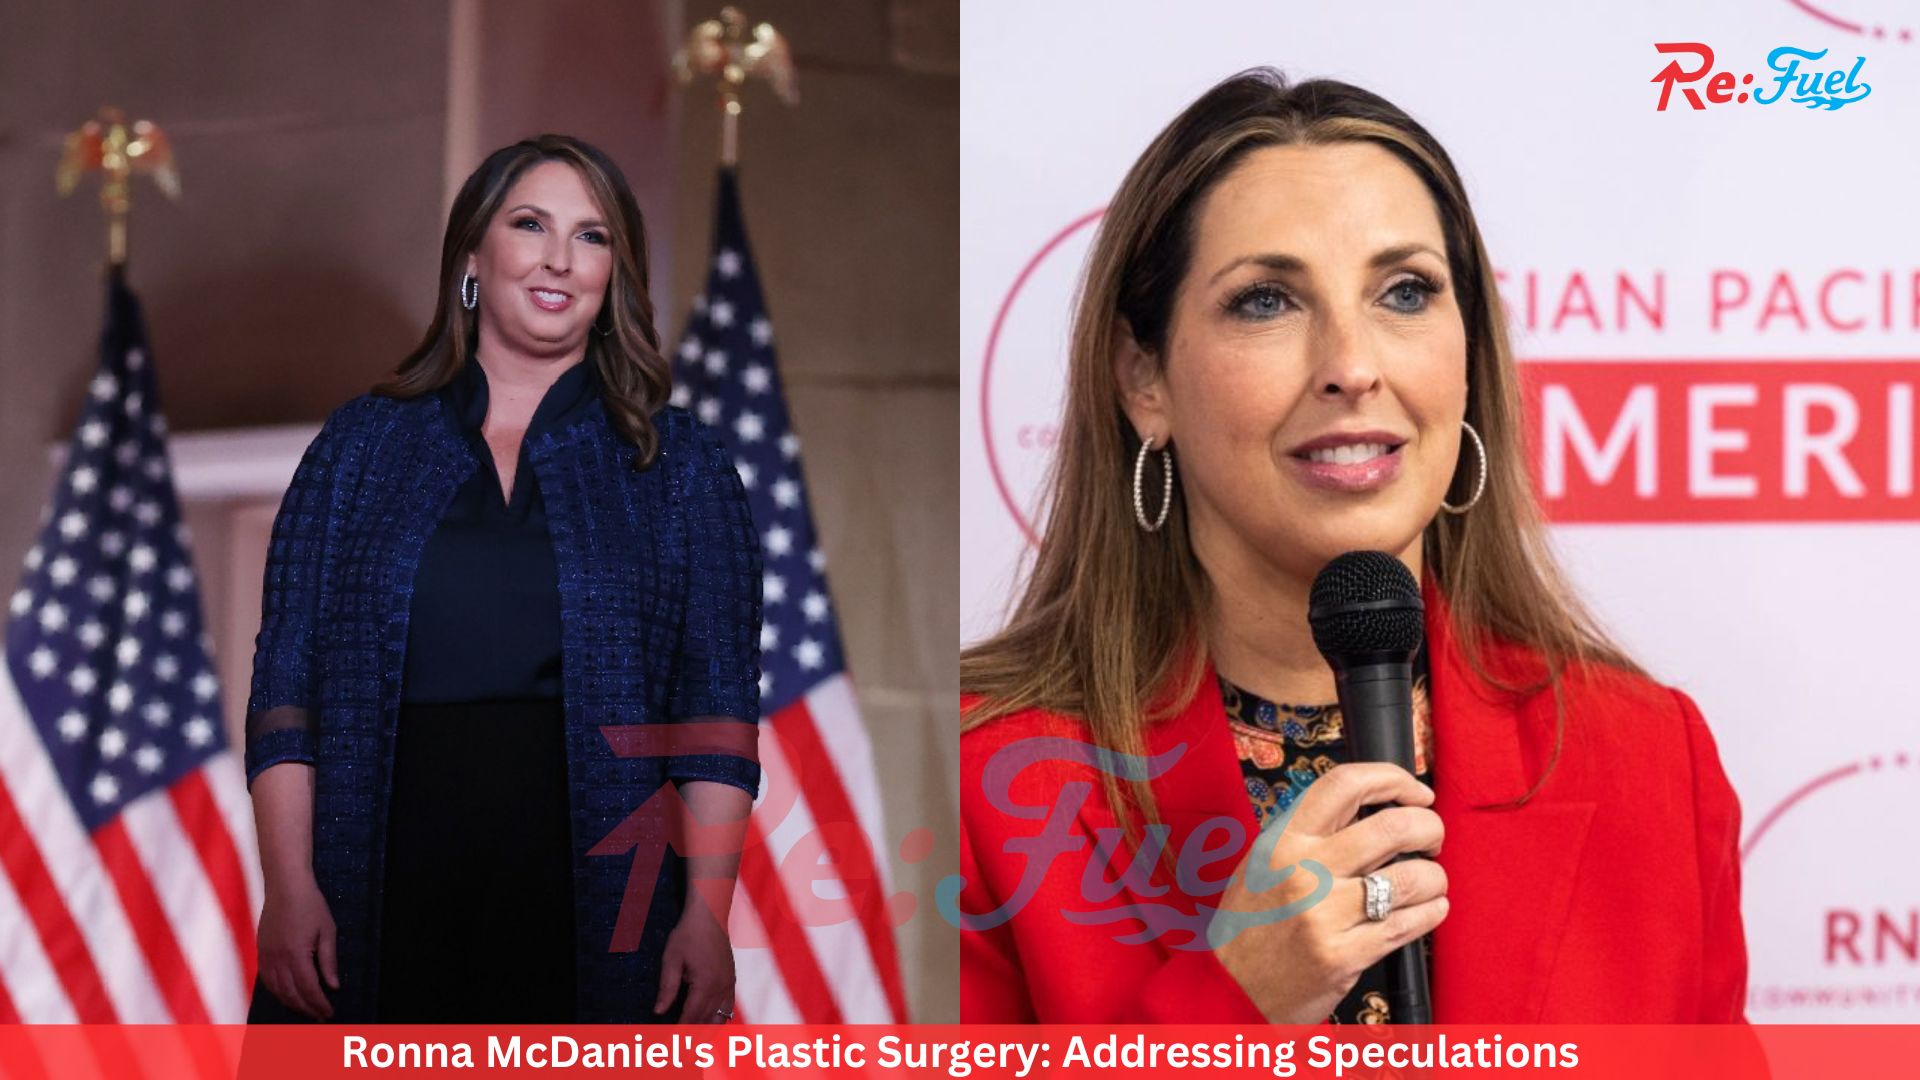 Ronna McDaniel's Plastic Surgery: Addressing Speculations